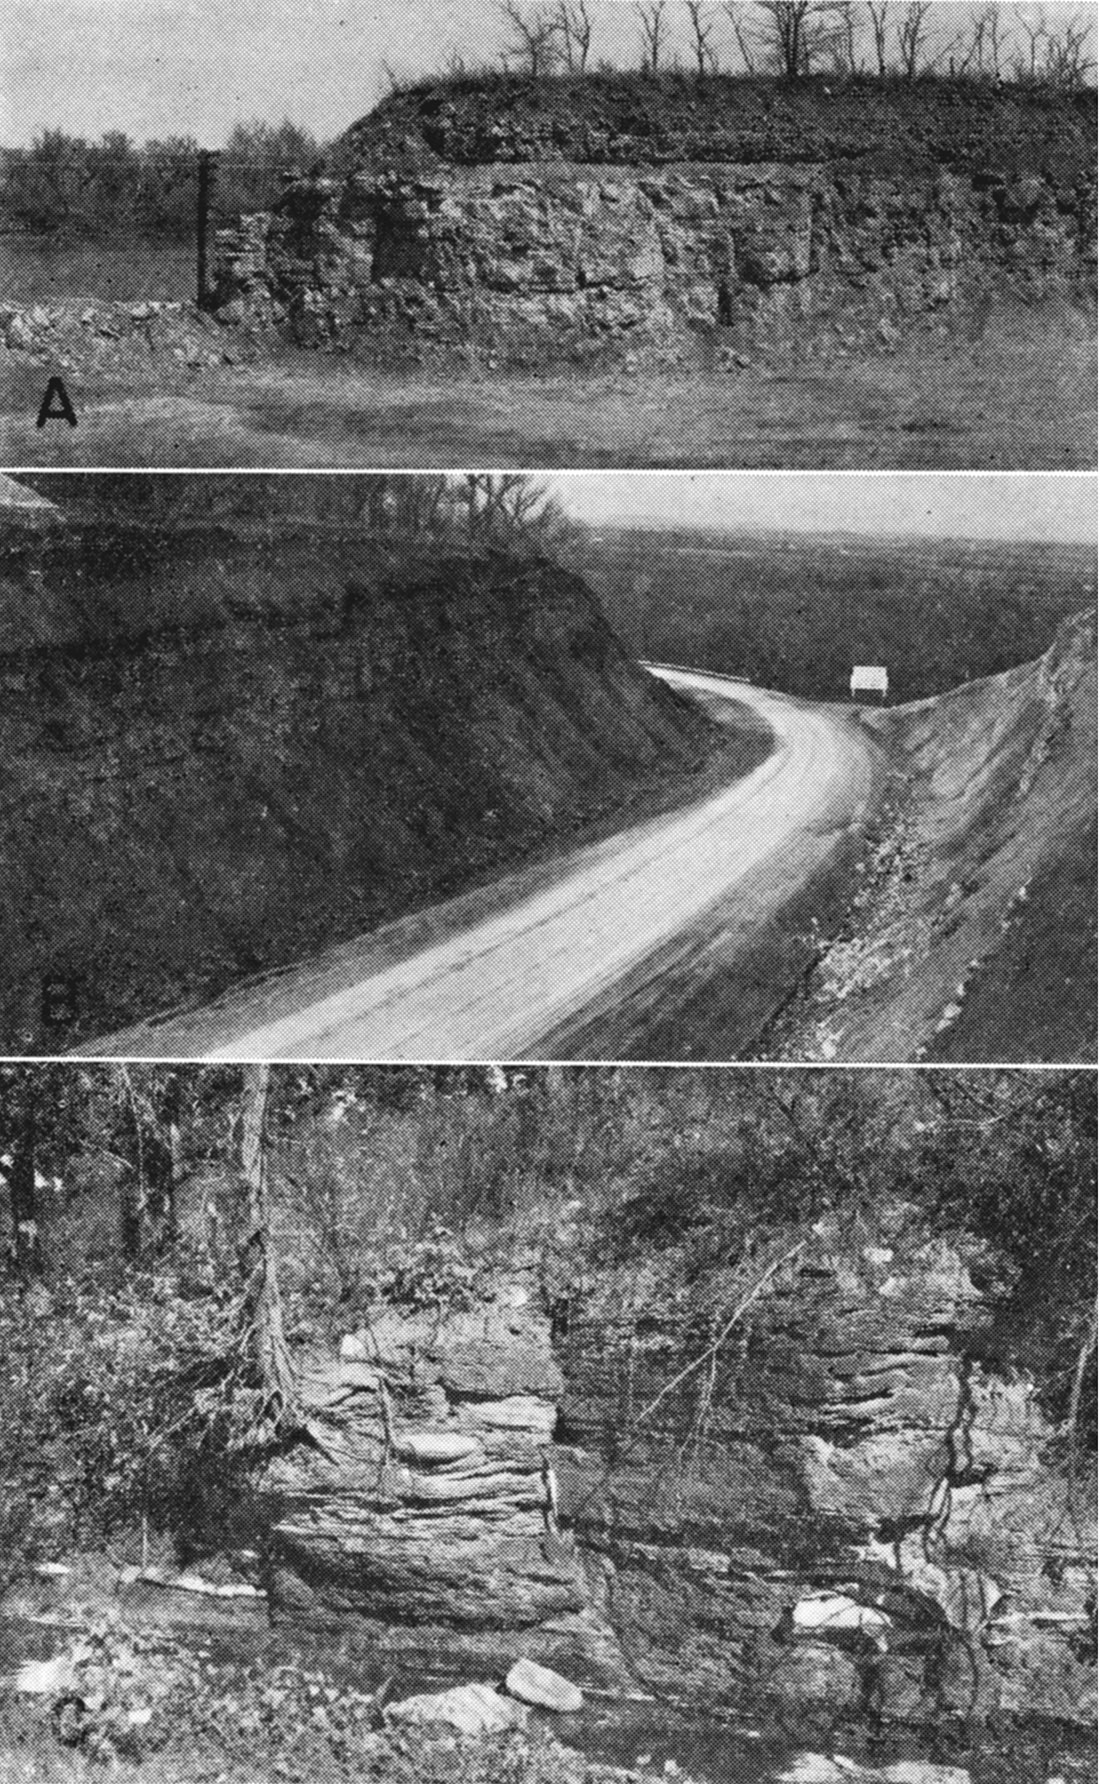 Three black and white photos; upper is of Plattsmouth Limestone, Heumader Shale, and Kereford Limestone members of Oread Limestone; middle is of Lower and middle Oread Limestone showing Snyderville Shale member and Toronto Limestone member; lower is thick black fissile Heebner Shale member.